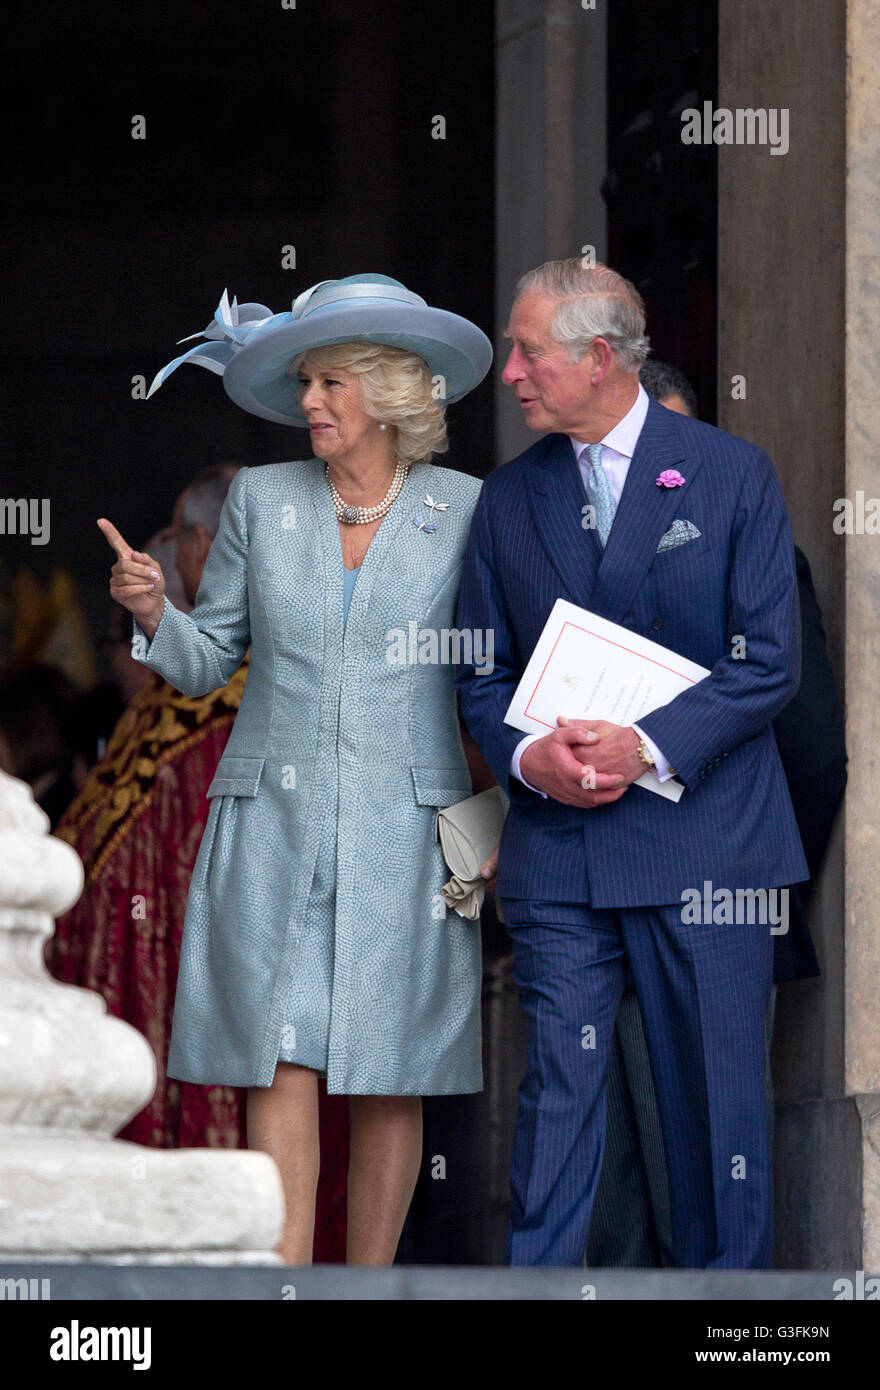 London, UK. 10th June, 2016. Prince Charles and Duchess Camilla Departure Members of the British Royal Family attend a National Service of Thanksgiving to mark Queen's Elisabeth 90th birthday at St Paul·s Cathedral in Londen RPE/Albert Nieboer/Netherlands OUTLondon, UK. 10th June, 2016. Stock Photo